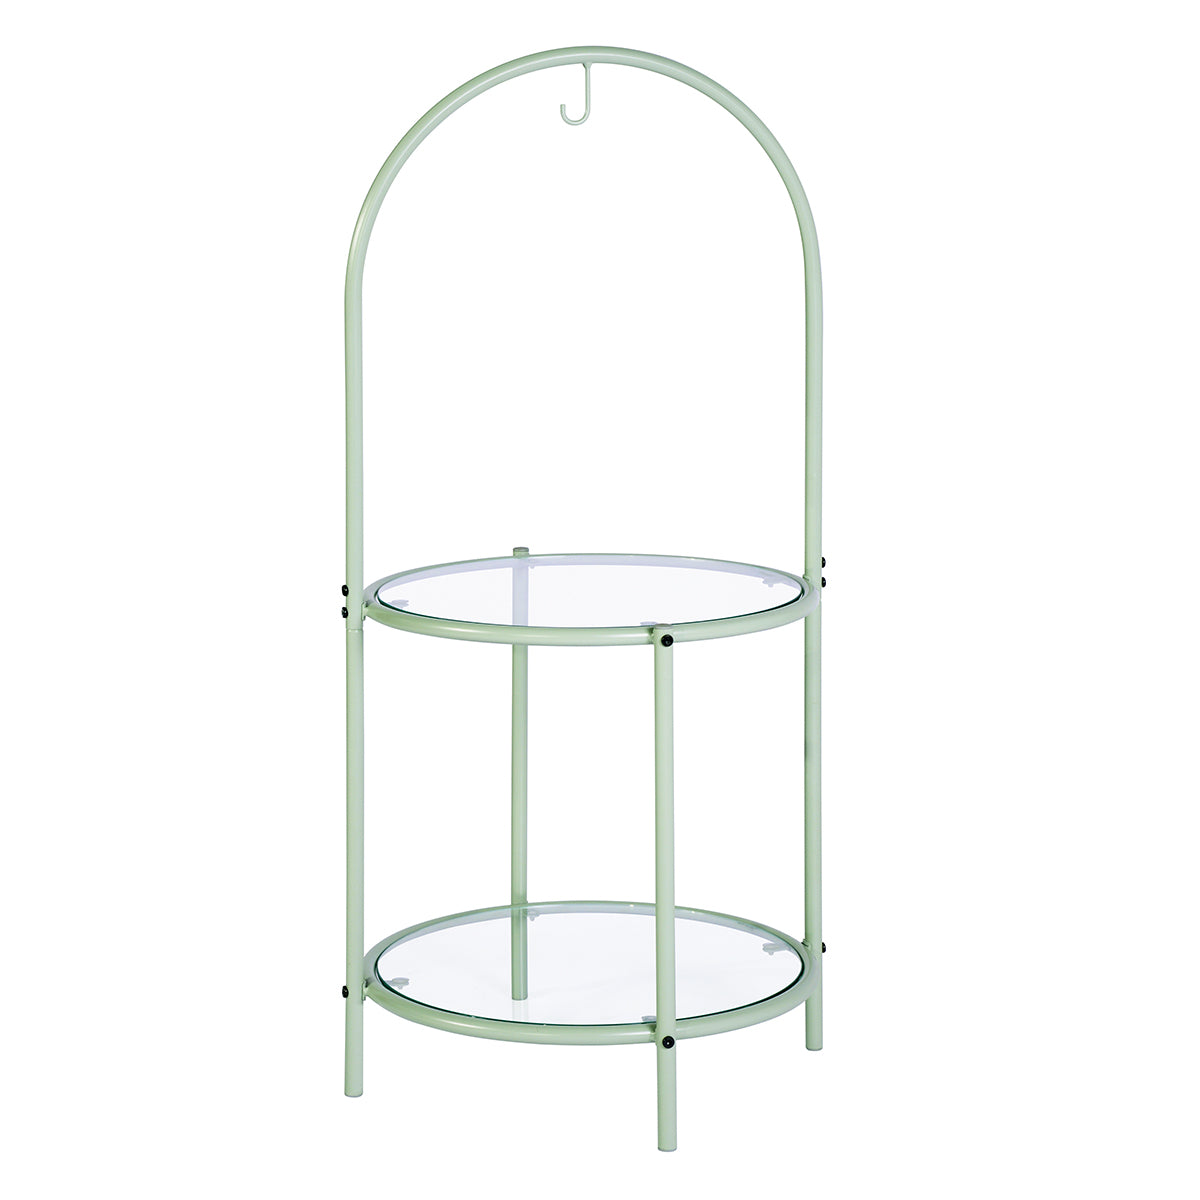 Glass Top End Table with Storage,Round Multi-Tiered Plant Stand